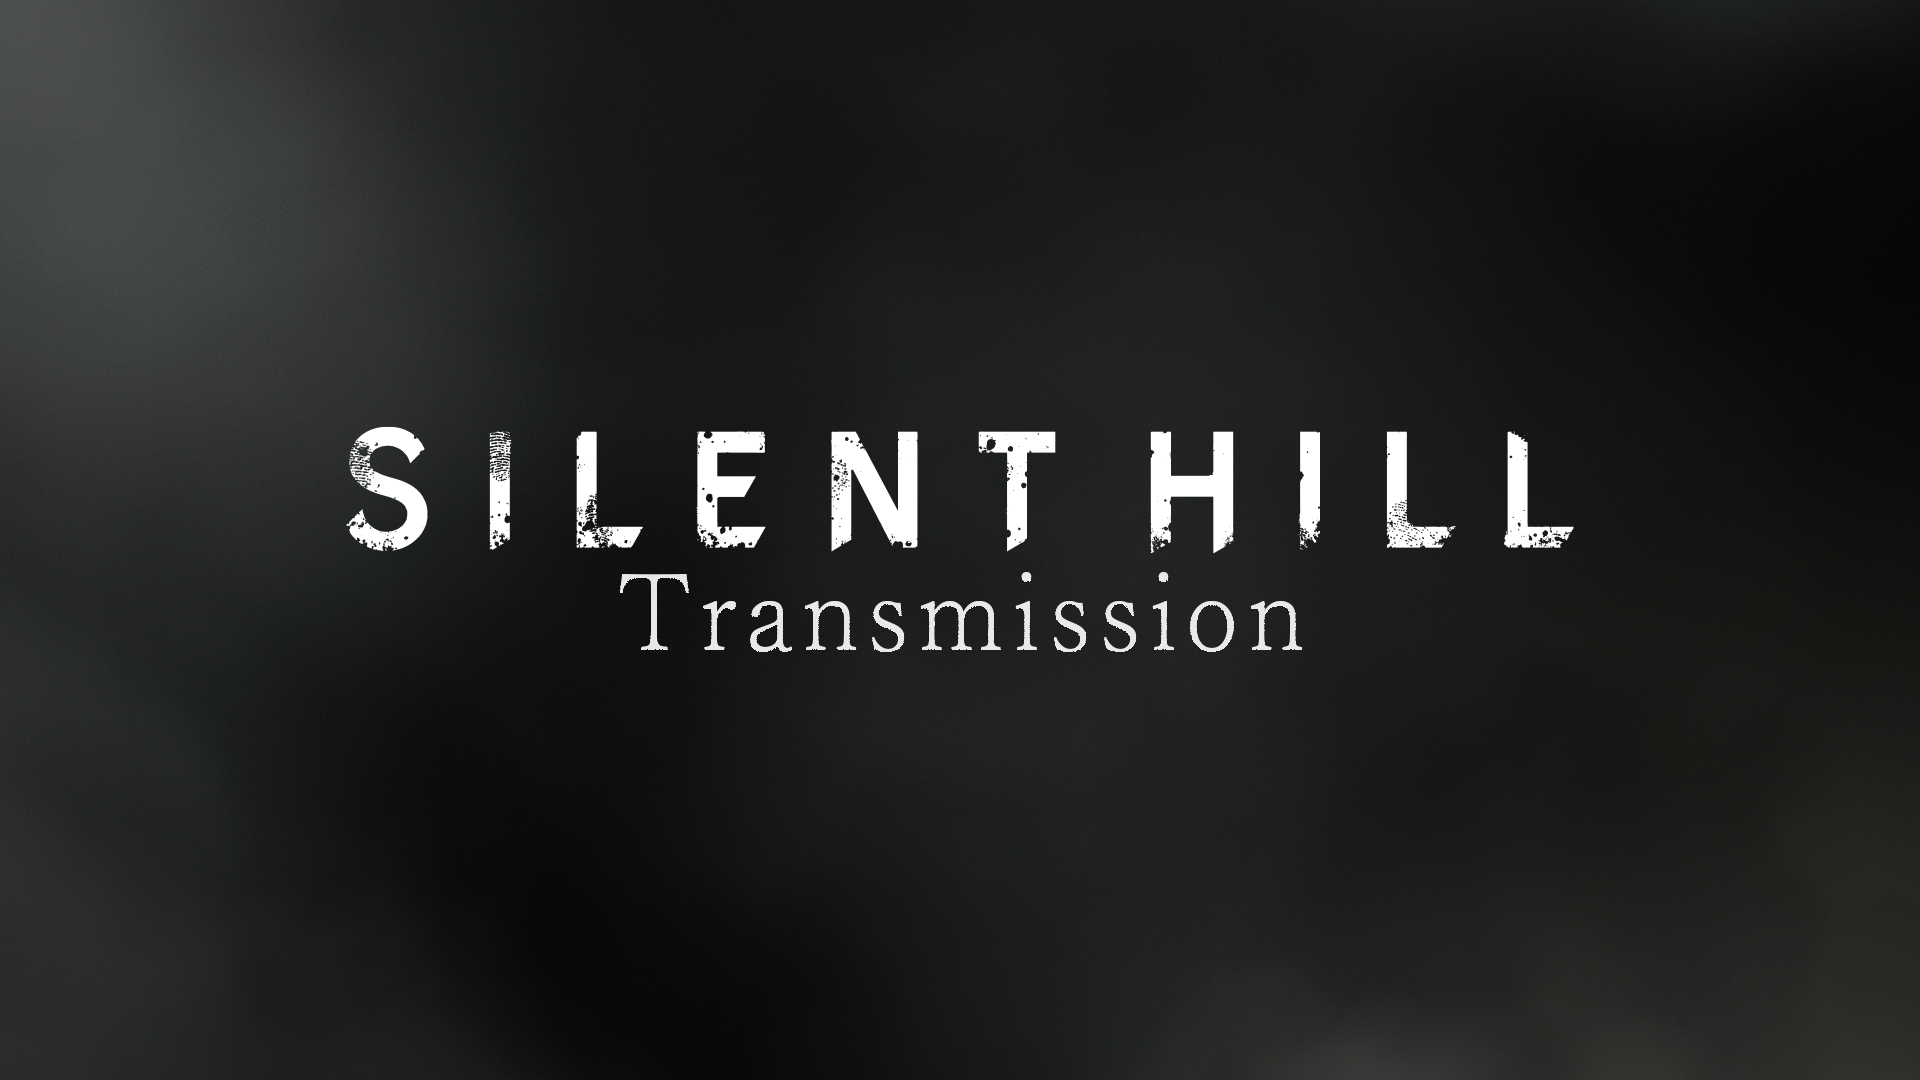 Silent Hill Transmission showcase is now live Game updates,